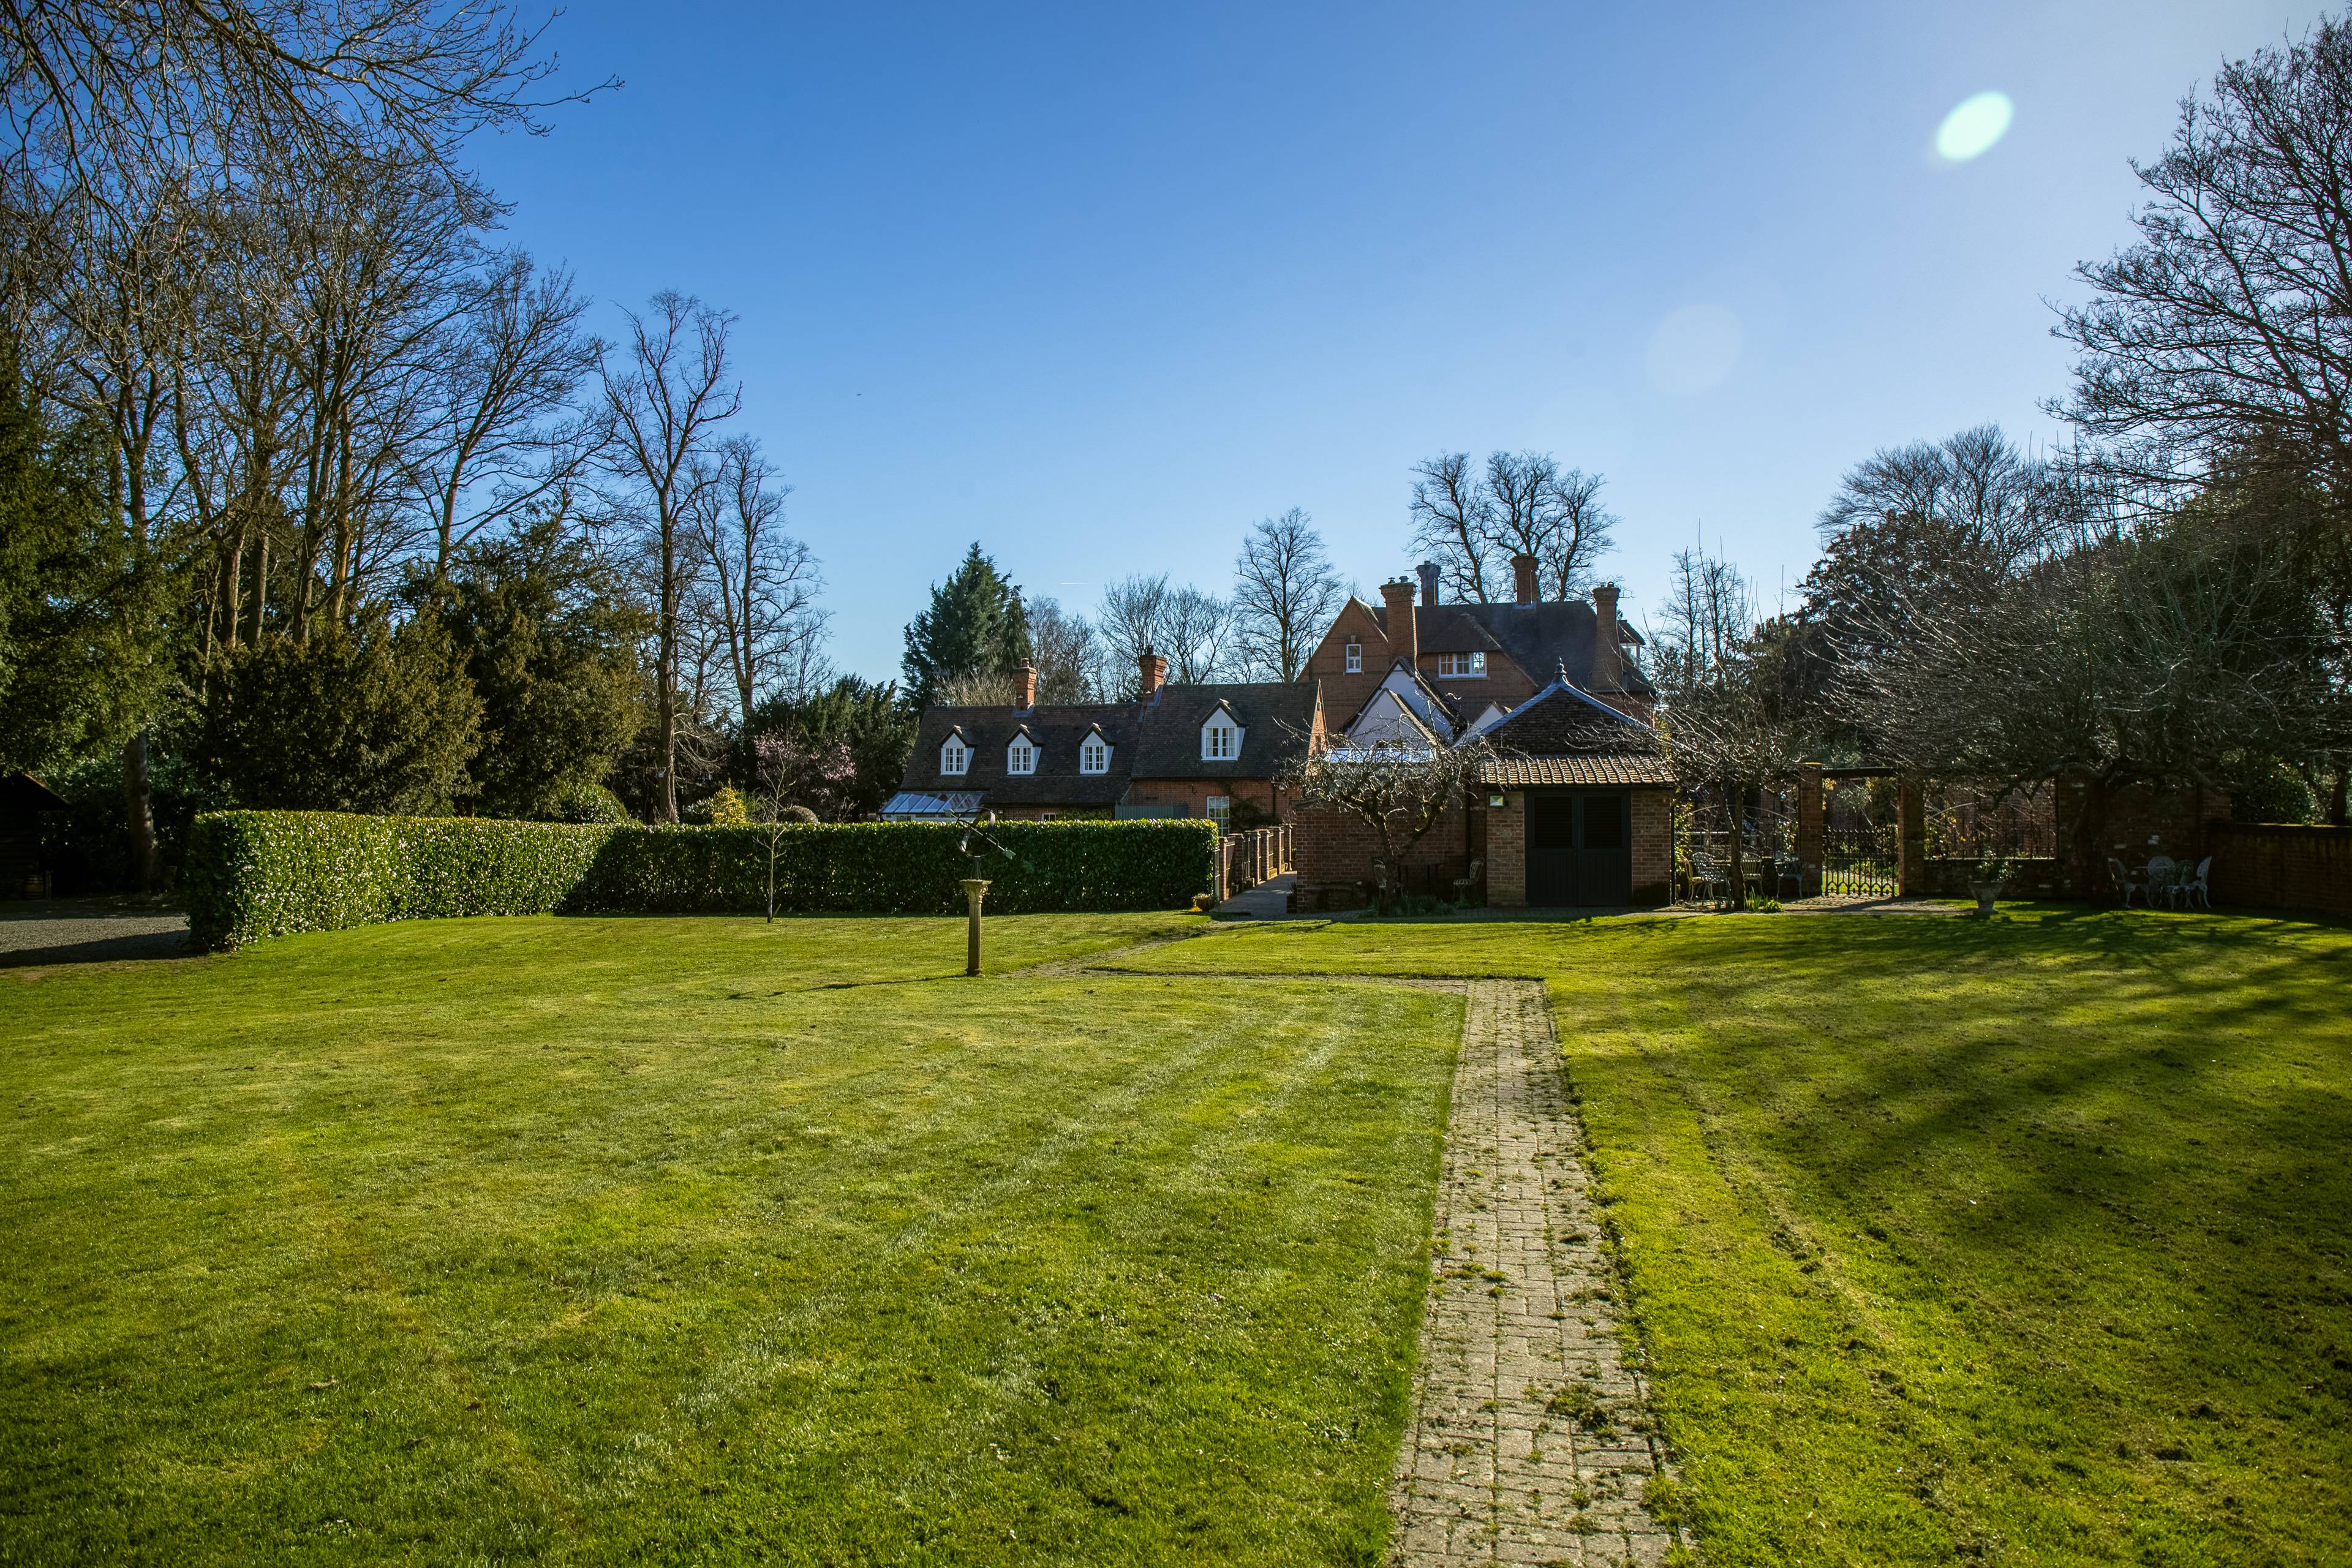 A quintessentially British country residence dating back to the 1600’s located on the Suffolk and Essex boarders